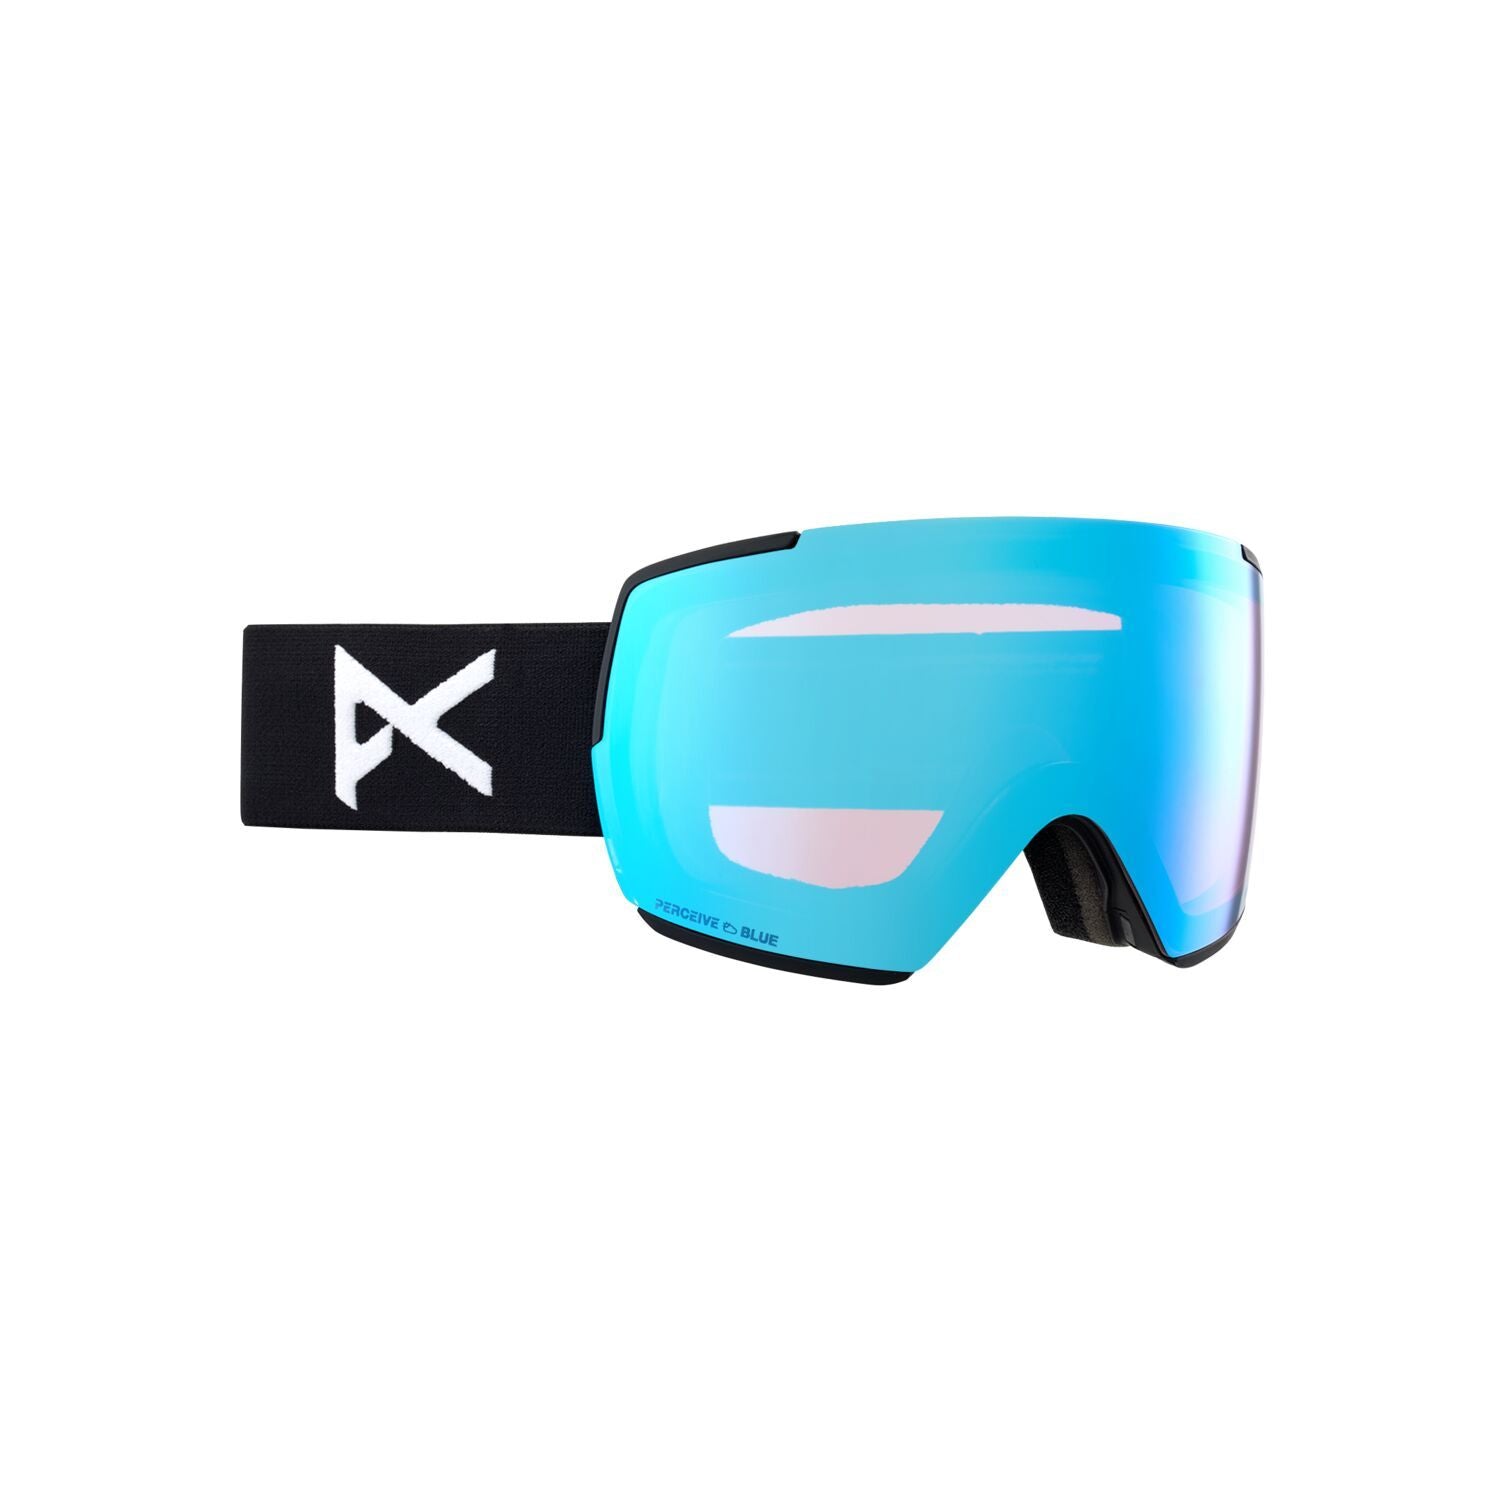 Anon M5 Snow Goggles Black Perceive Variable Blue Snow Goggles